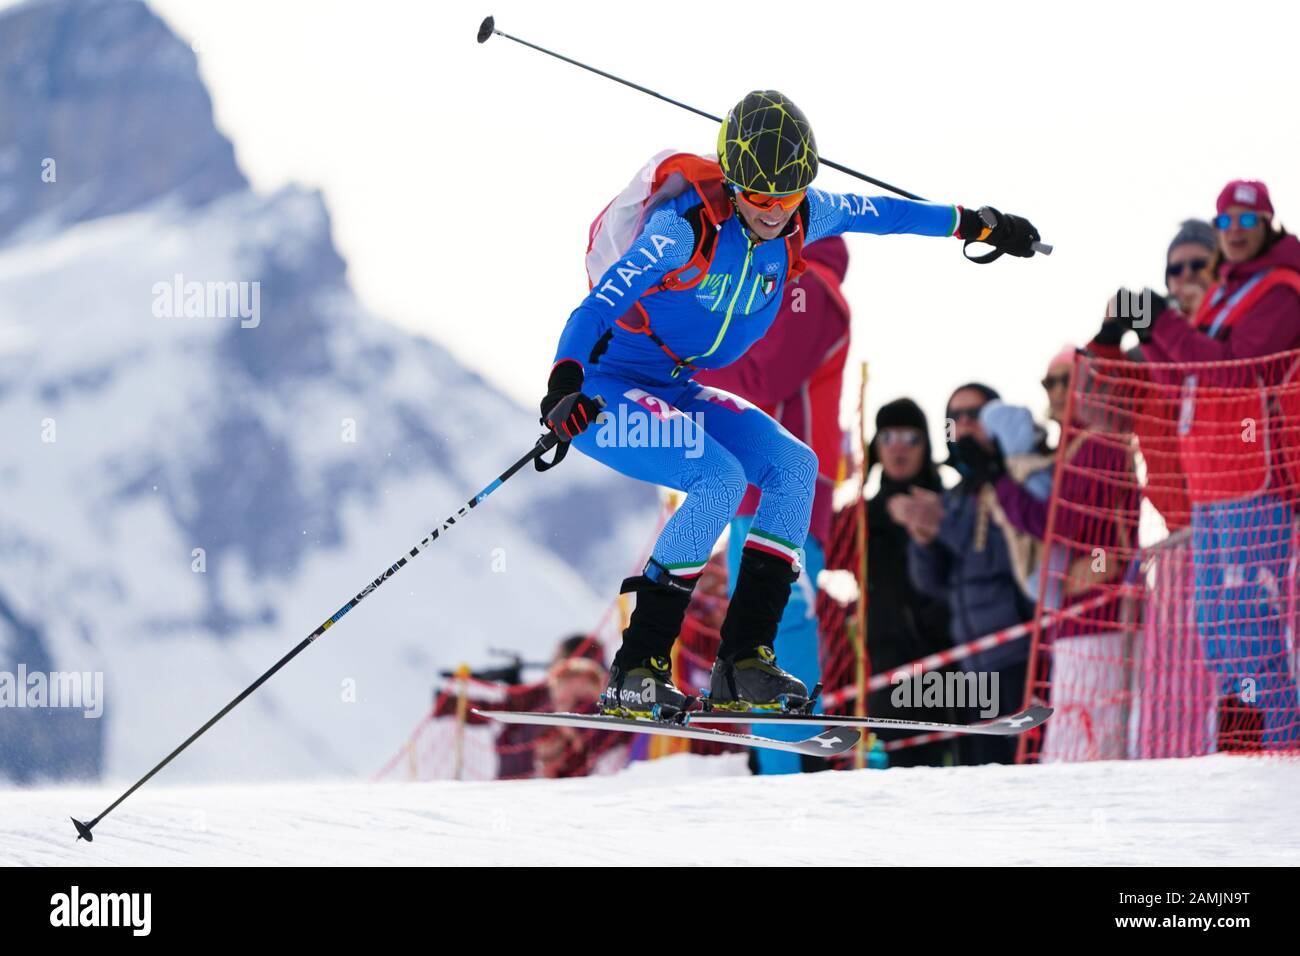 Villars. 13th Jan, 2020. Rocco Baldini of Italy competes during the men's sprint of ski mountaineering at the 3rd Winter Youth Olympic Games at Villars Winter Park in Villars, Switzerland on Jan. 13, 2020. Credit: Bai Xueqi/Xinhua/Alamy Live News Stock Photo